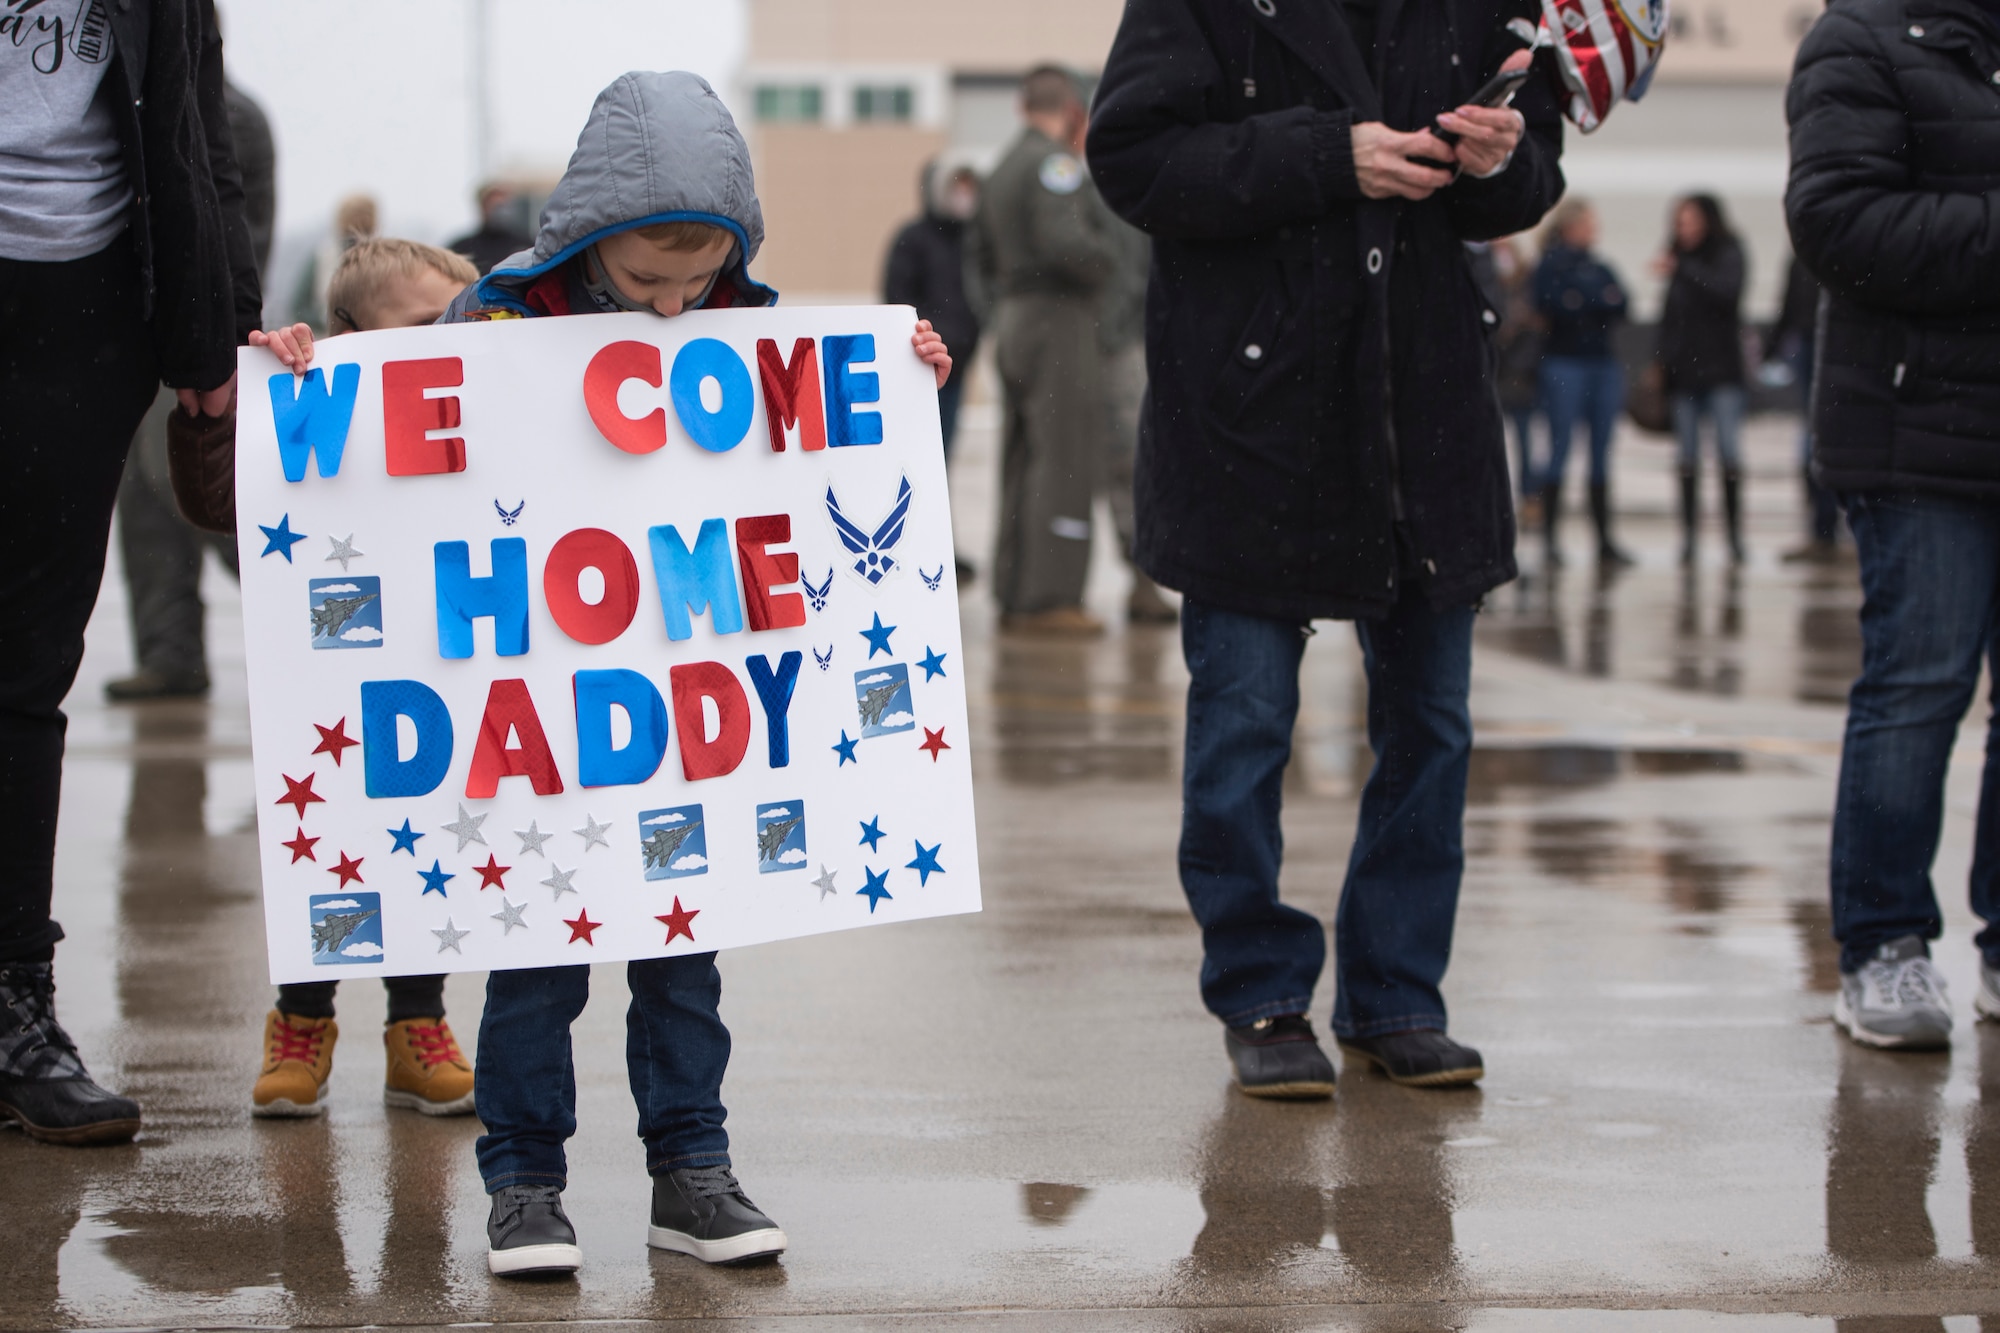 A child waits the return of his father after an overseas deployment, Jan. 26, 2020 at the 180FW in Swanton, Ohio.